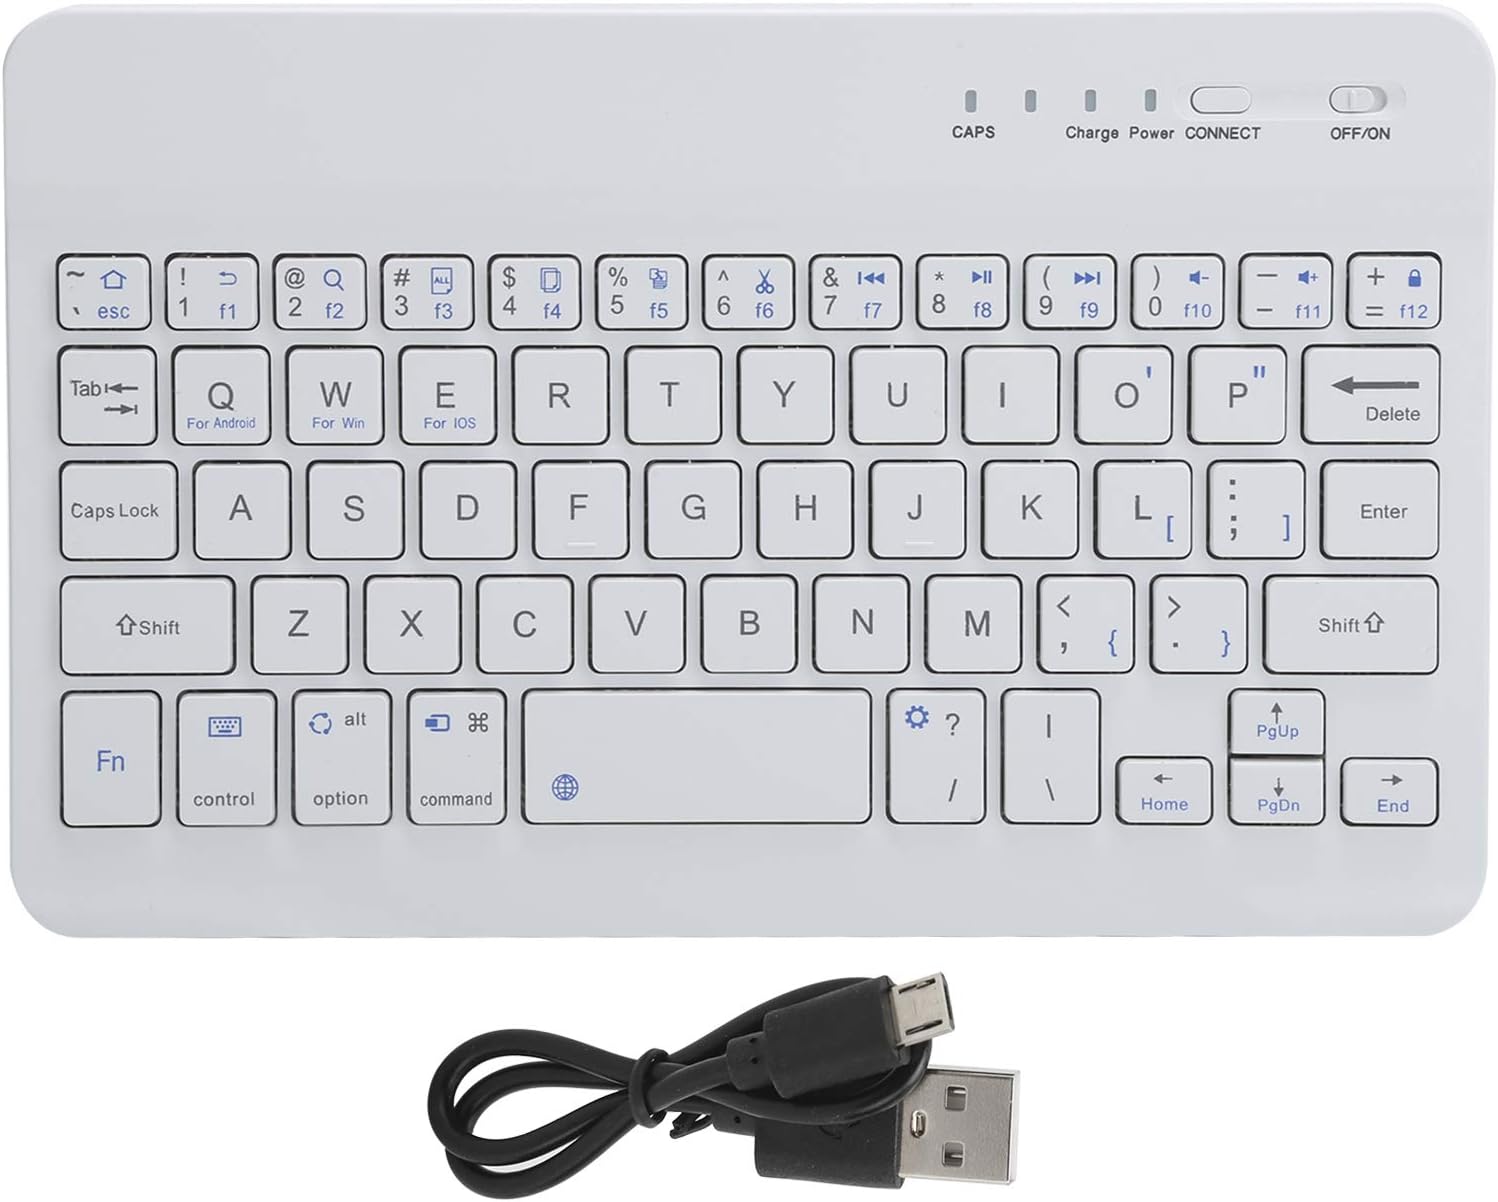  Wireless Keyboard   Ultra Slim   Rechargeable  Portable Compact  - ONS79 2053-5